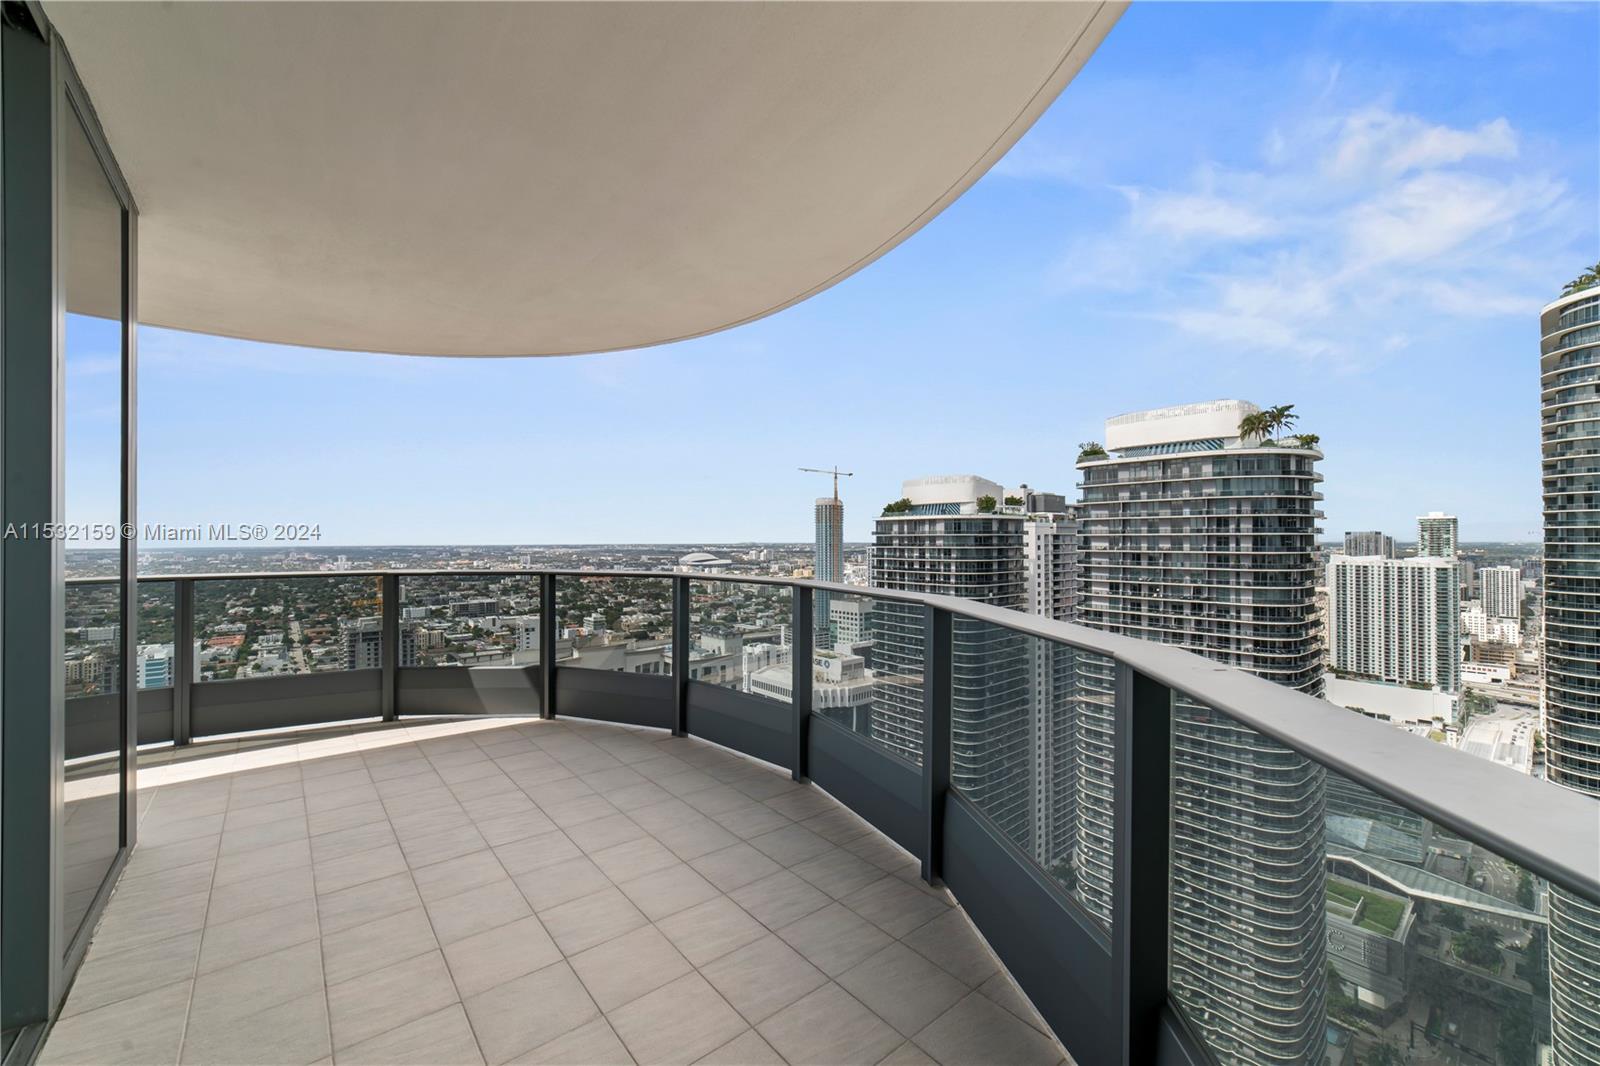 Miami's most sought out building, Flat Iron Brickell. 2 Beds, 2,5 Baths. This coveted corner unit in 12 line residence, the only reconfigured floor plan unit, offers unobstructed sweeping views from the 48th floor featuring 1,446 SF, 2 wraparound terraces, a grand master suite, Snaidero kitchen, Miele appliances, upgraded Italian acrylic doors. The masterpiece by Ugo Colombo and designed by Luis Revuelta offers luxury like no other with 64th rooftop pool, spa, and gym above the city, an additional 18th floor pool, movie theater, and billiards lounge are some of the key amenities to enjoy as an exclusive resident. Property available MAY 31st.